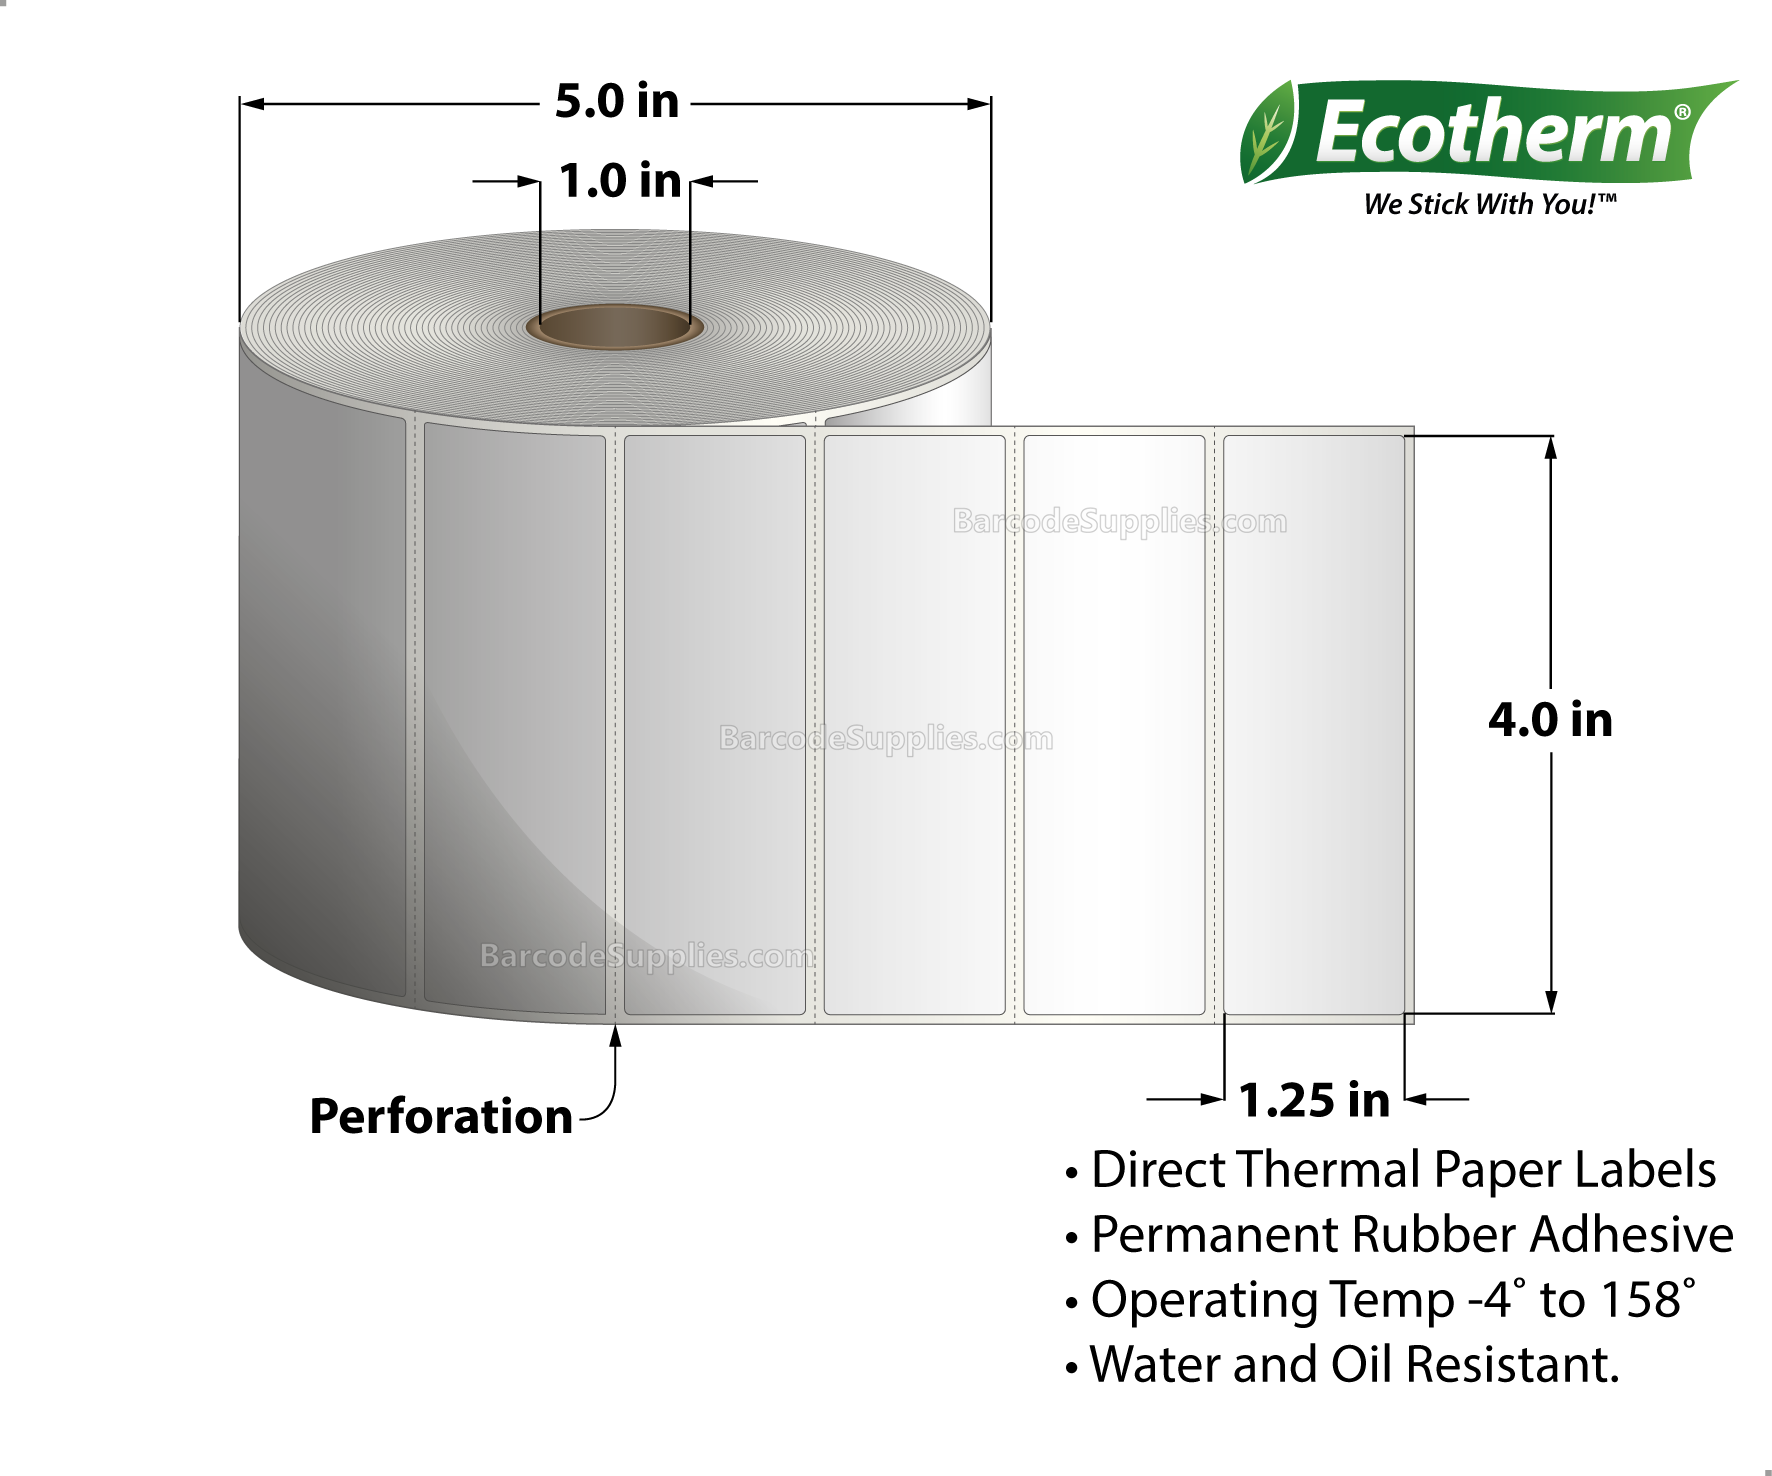 4 x 1.25 Direct Thermal White Labels With Rubber Adhesive - Perforated - 2100 Labels Per Roll - Carton Of 6 Rolls - 12600 Labels Total - MPN: ECOTHERM15157-6